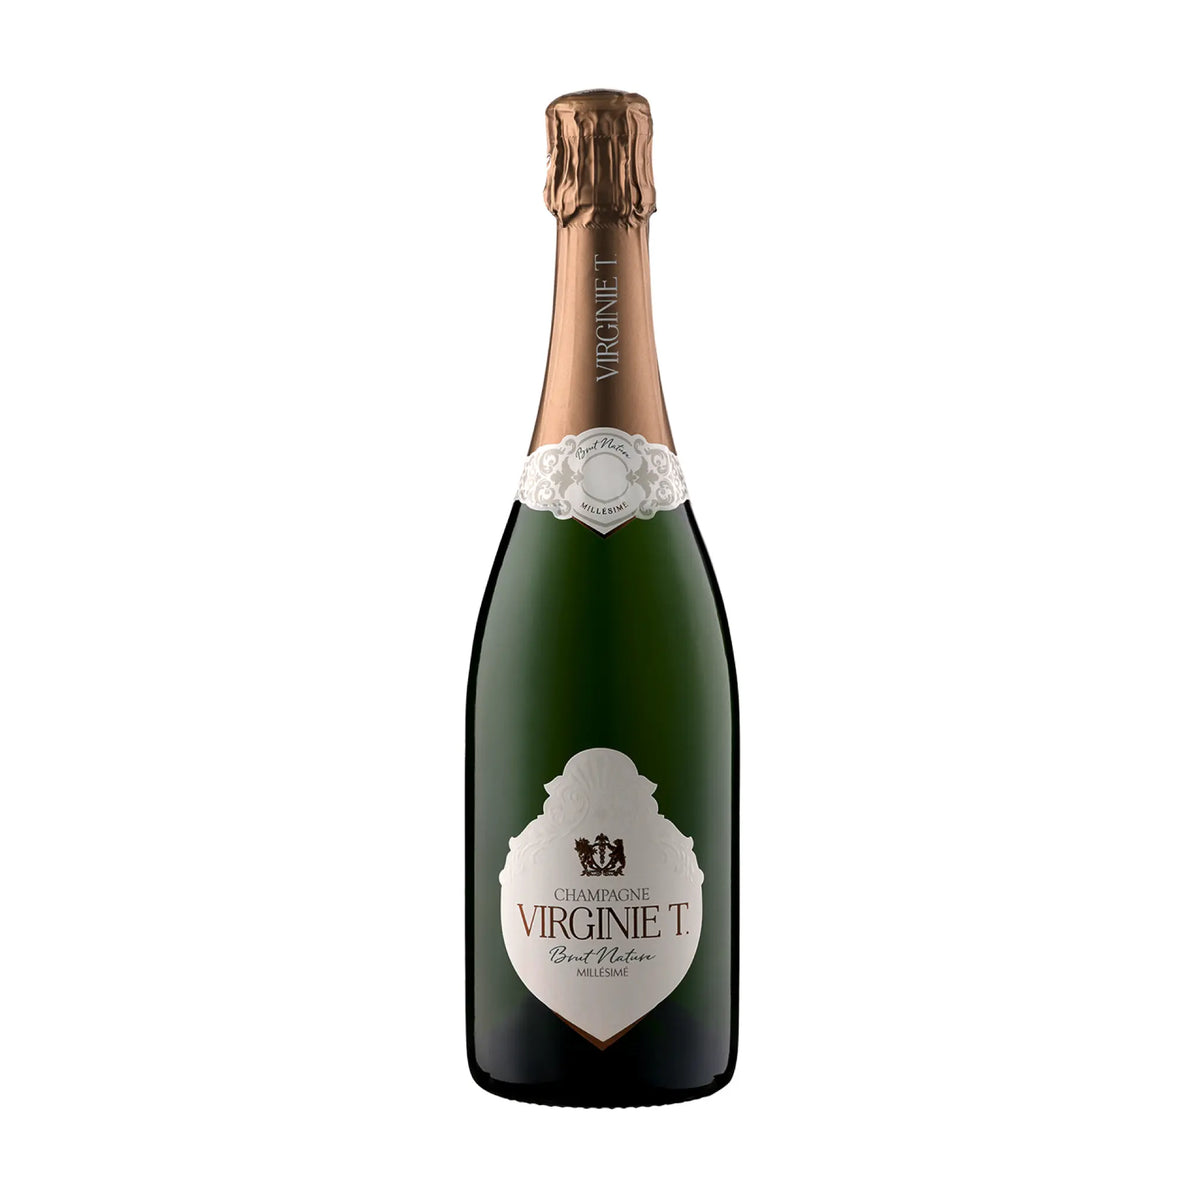 Champagne Virginie T.-Champagner-Champagner-Frankreich-Champagne-2009 Champagne Virginie T. Millésimé Brut Nature-WINECOM